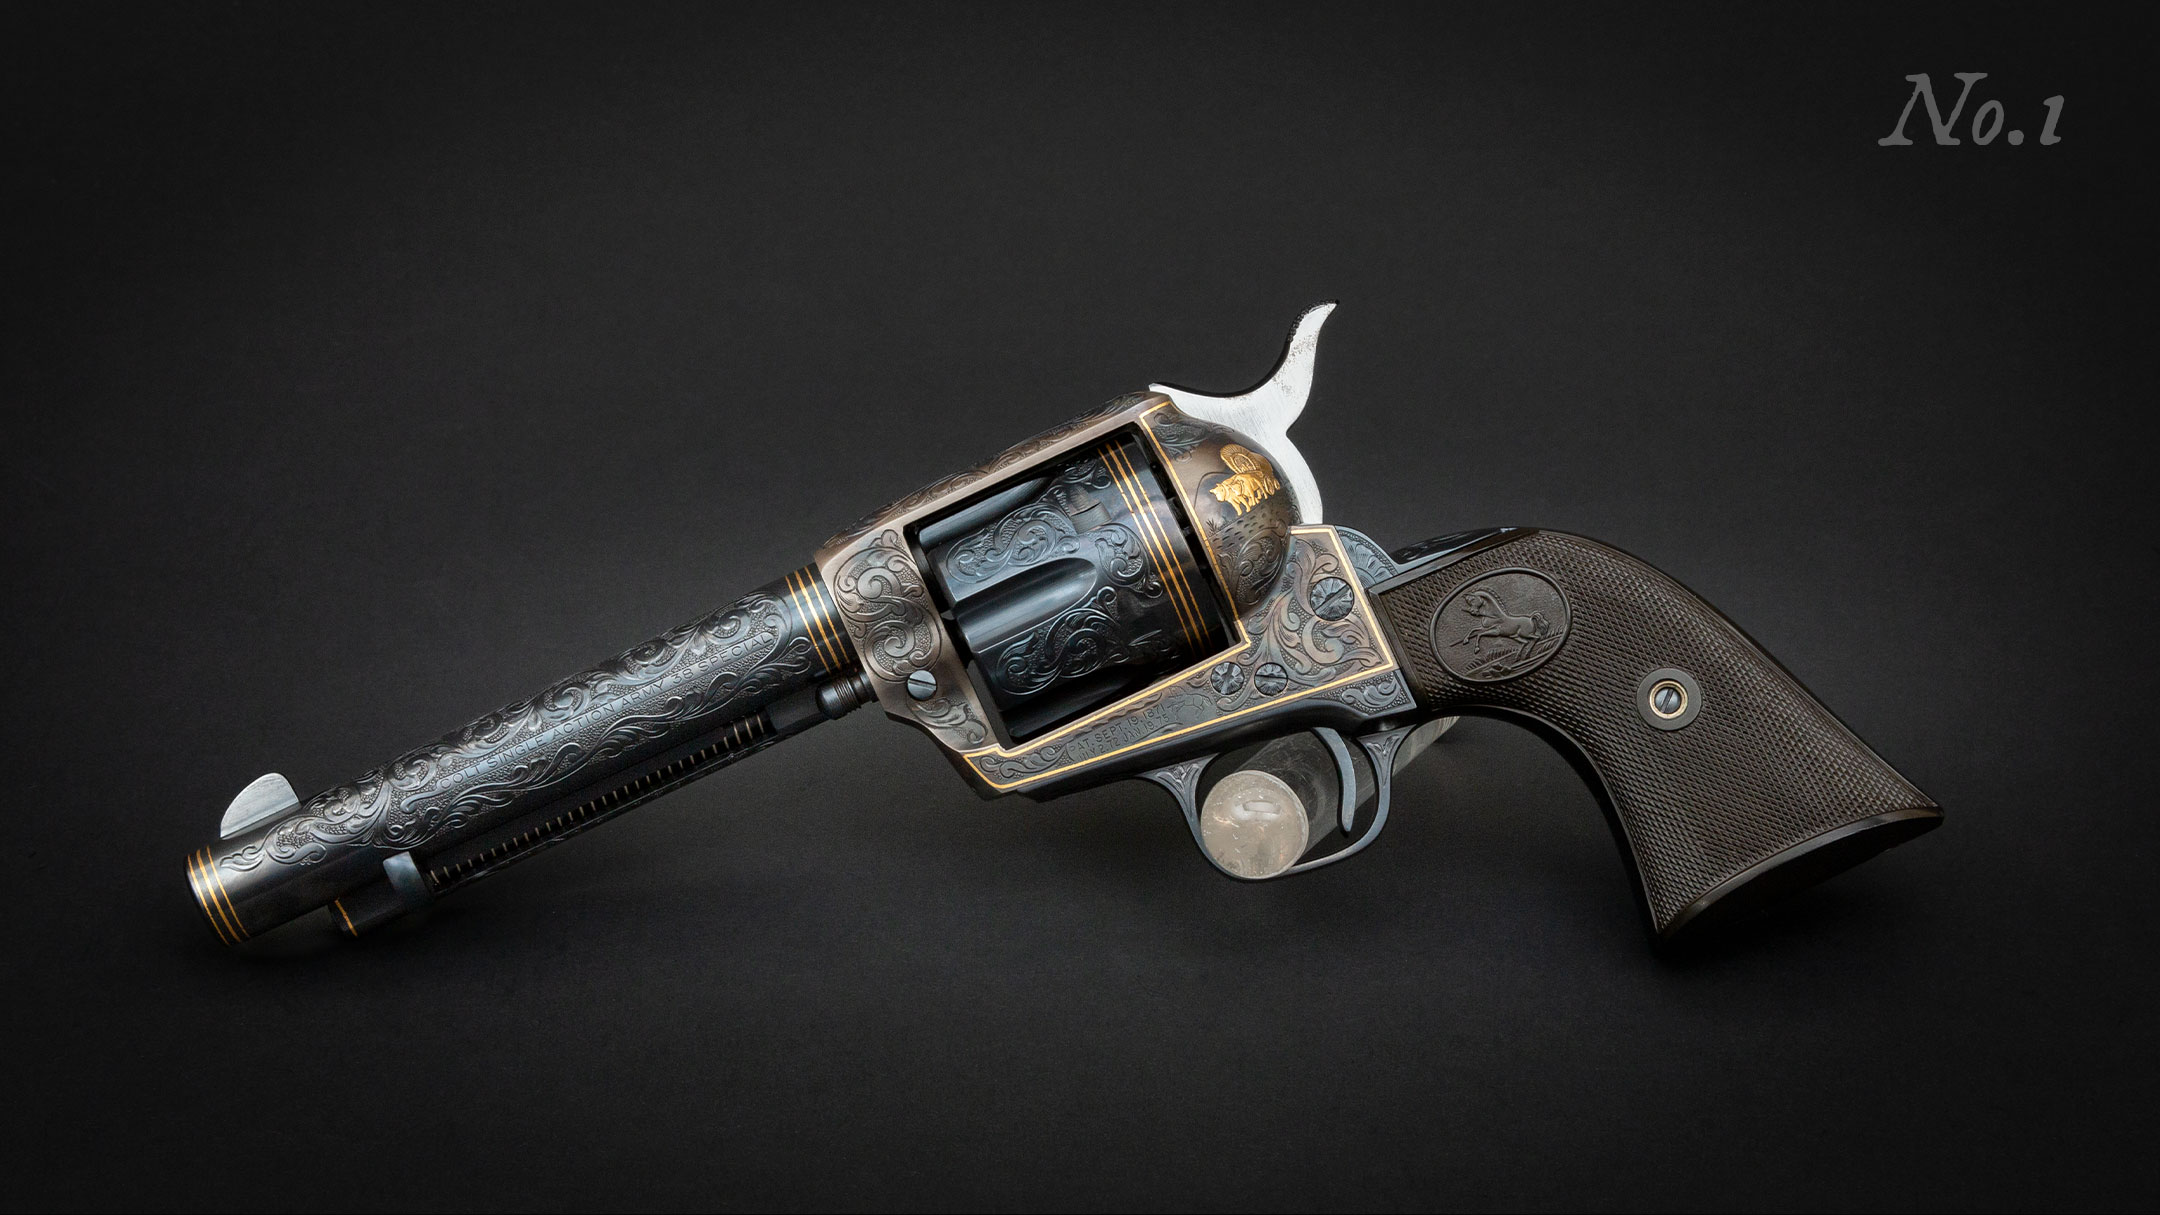 First of a consecutive-numbered pair of 2nd Generation, Bledsoe-engraved, Colt Single Action Army revolvers, restored and for sale by Turnbull Restoration of Bloomfield, NY